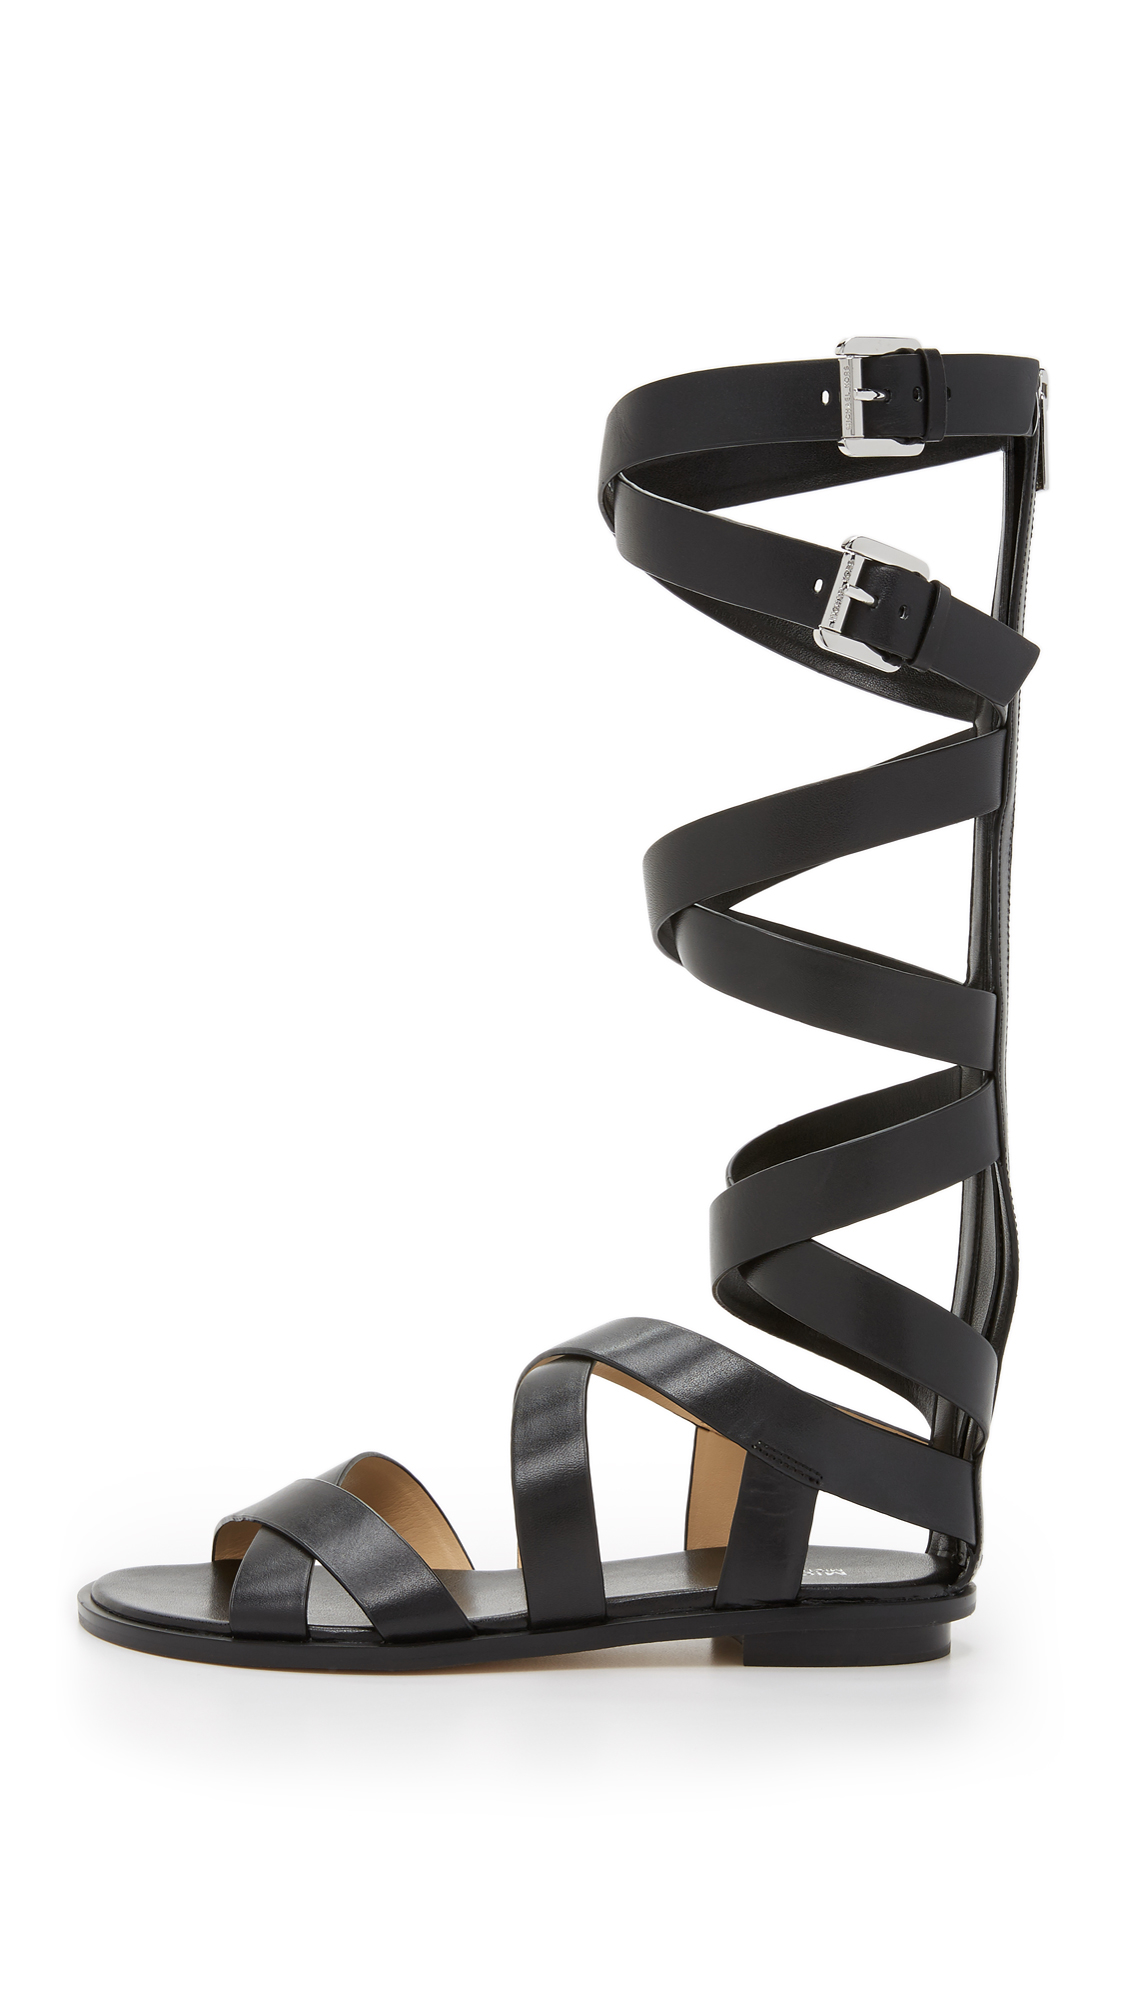 MICHAEL Michael Kors Leather Darby Gladiator Sandals in Black - Lyst